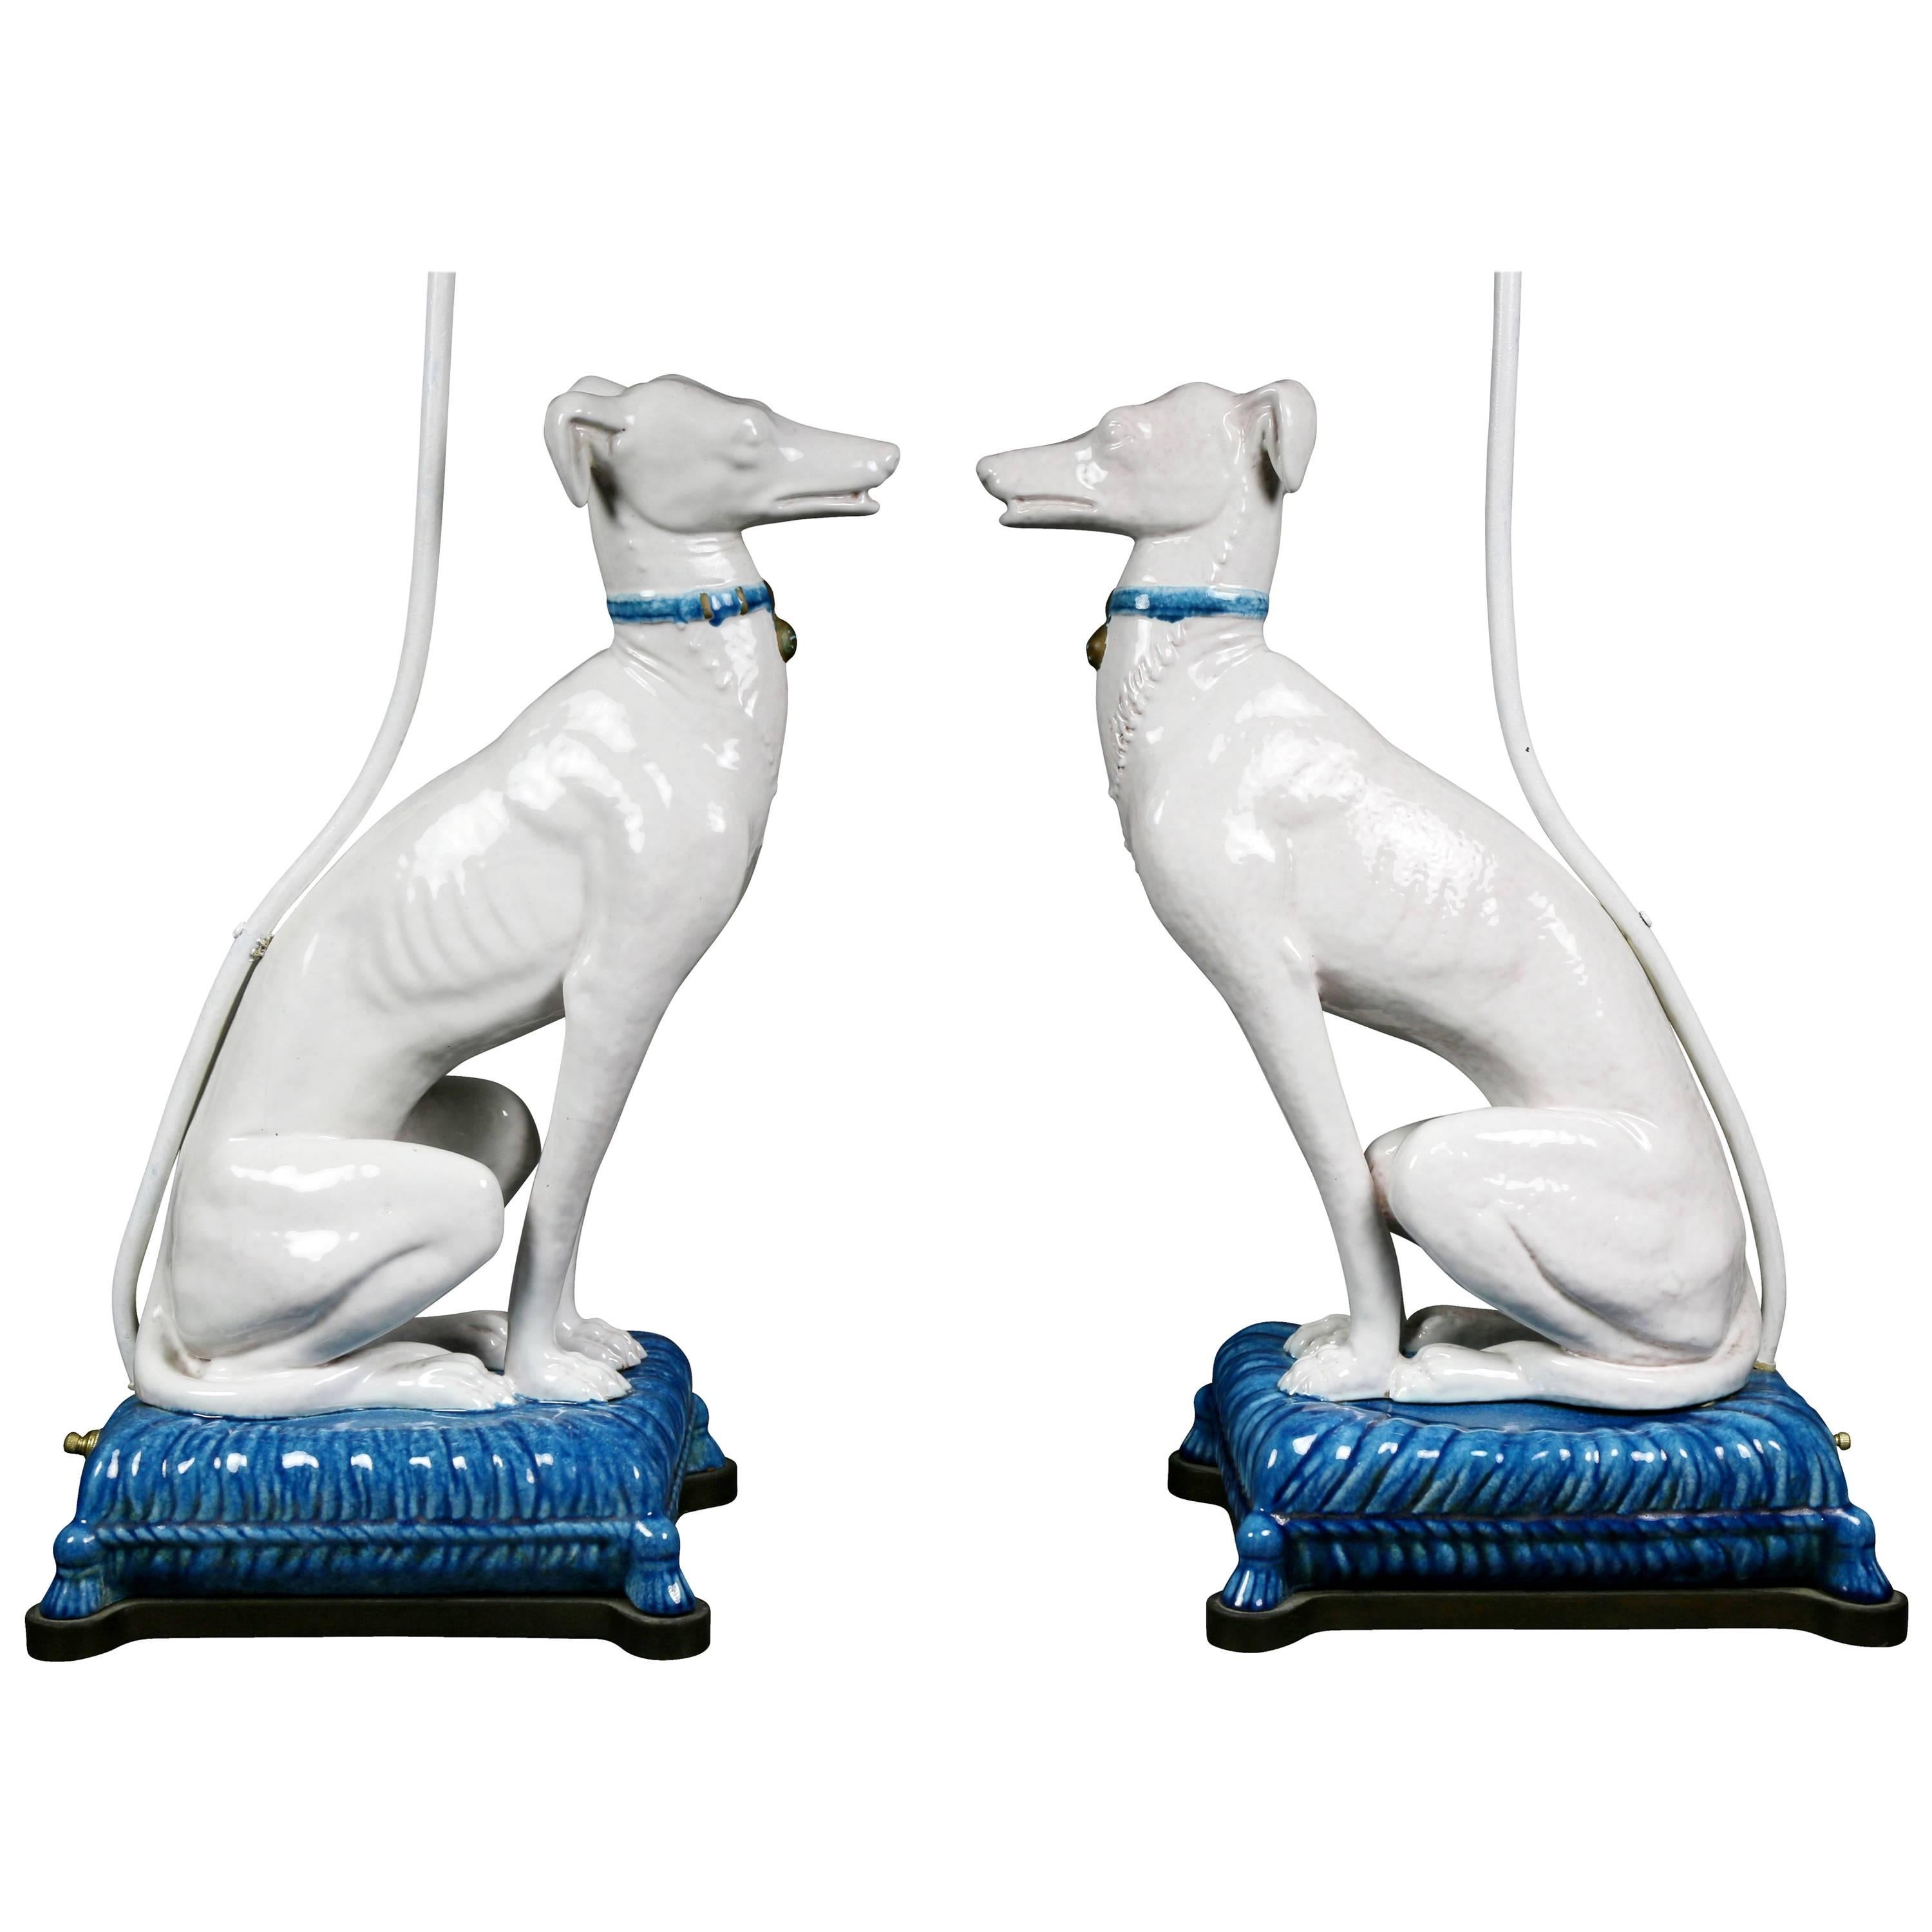 Pair of Pottery Figures of Seated Whippets Mounted as Lamps